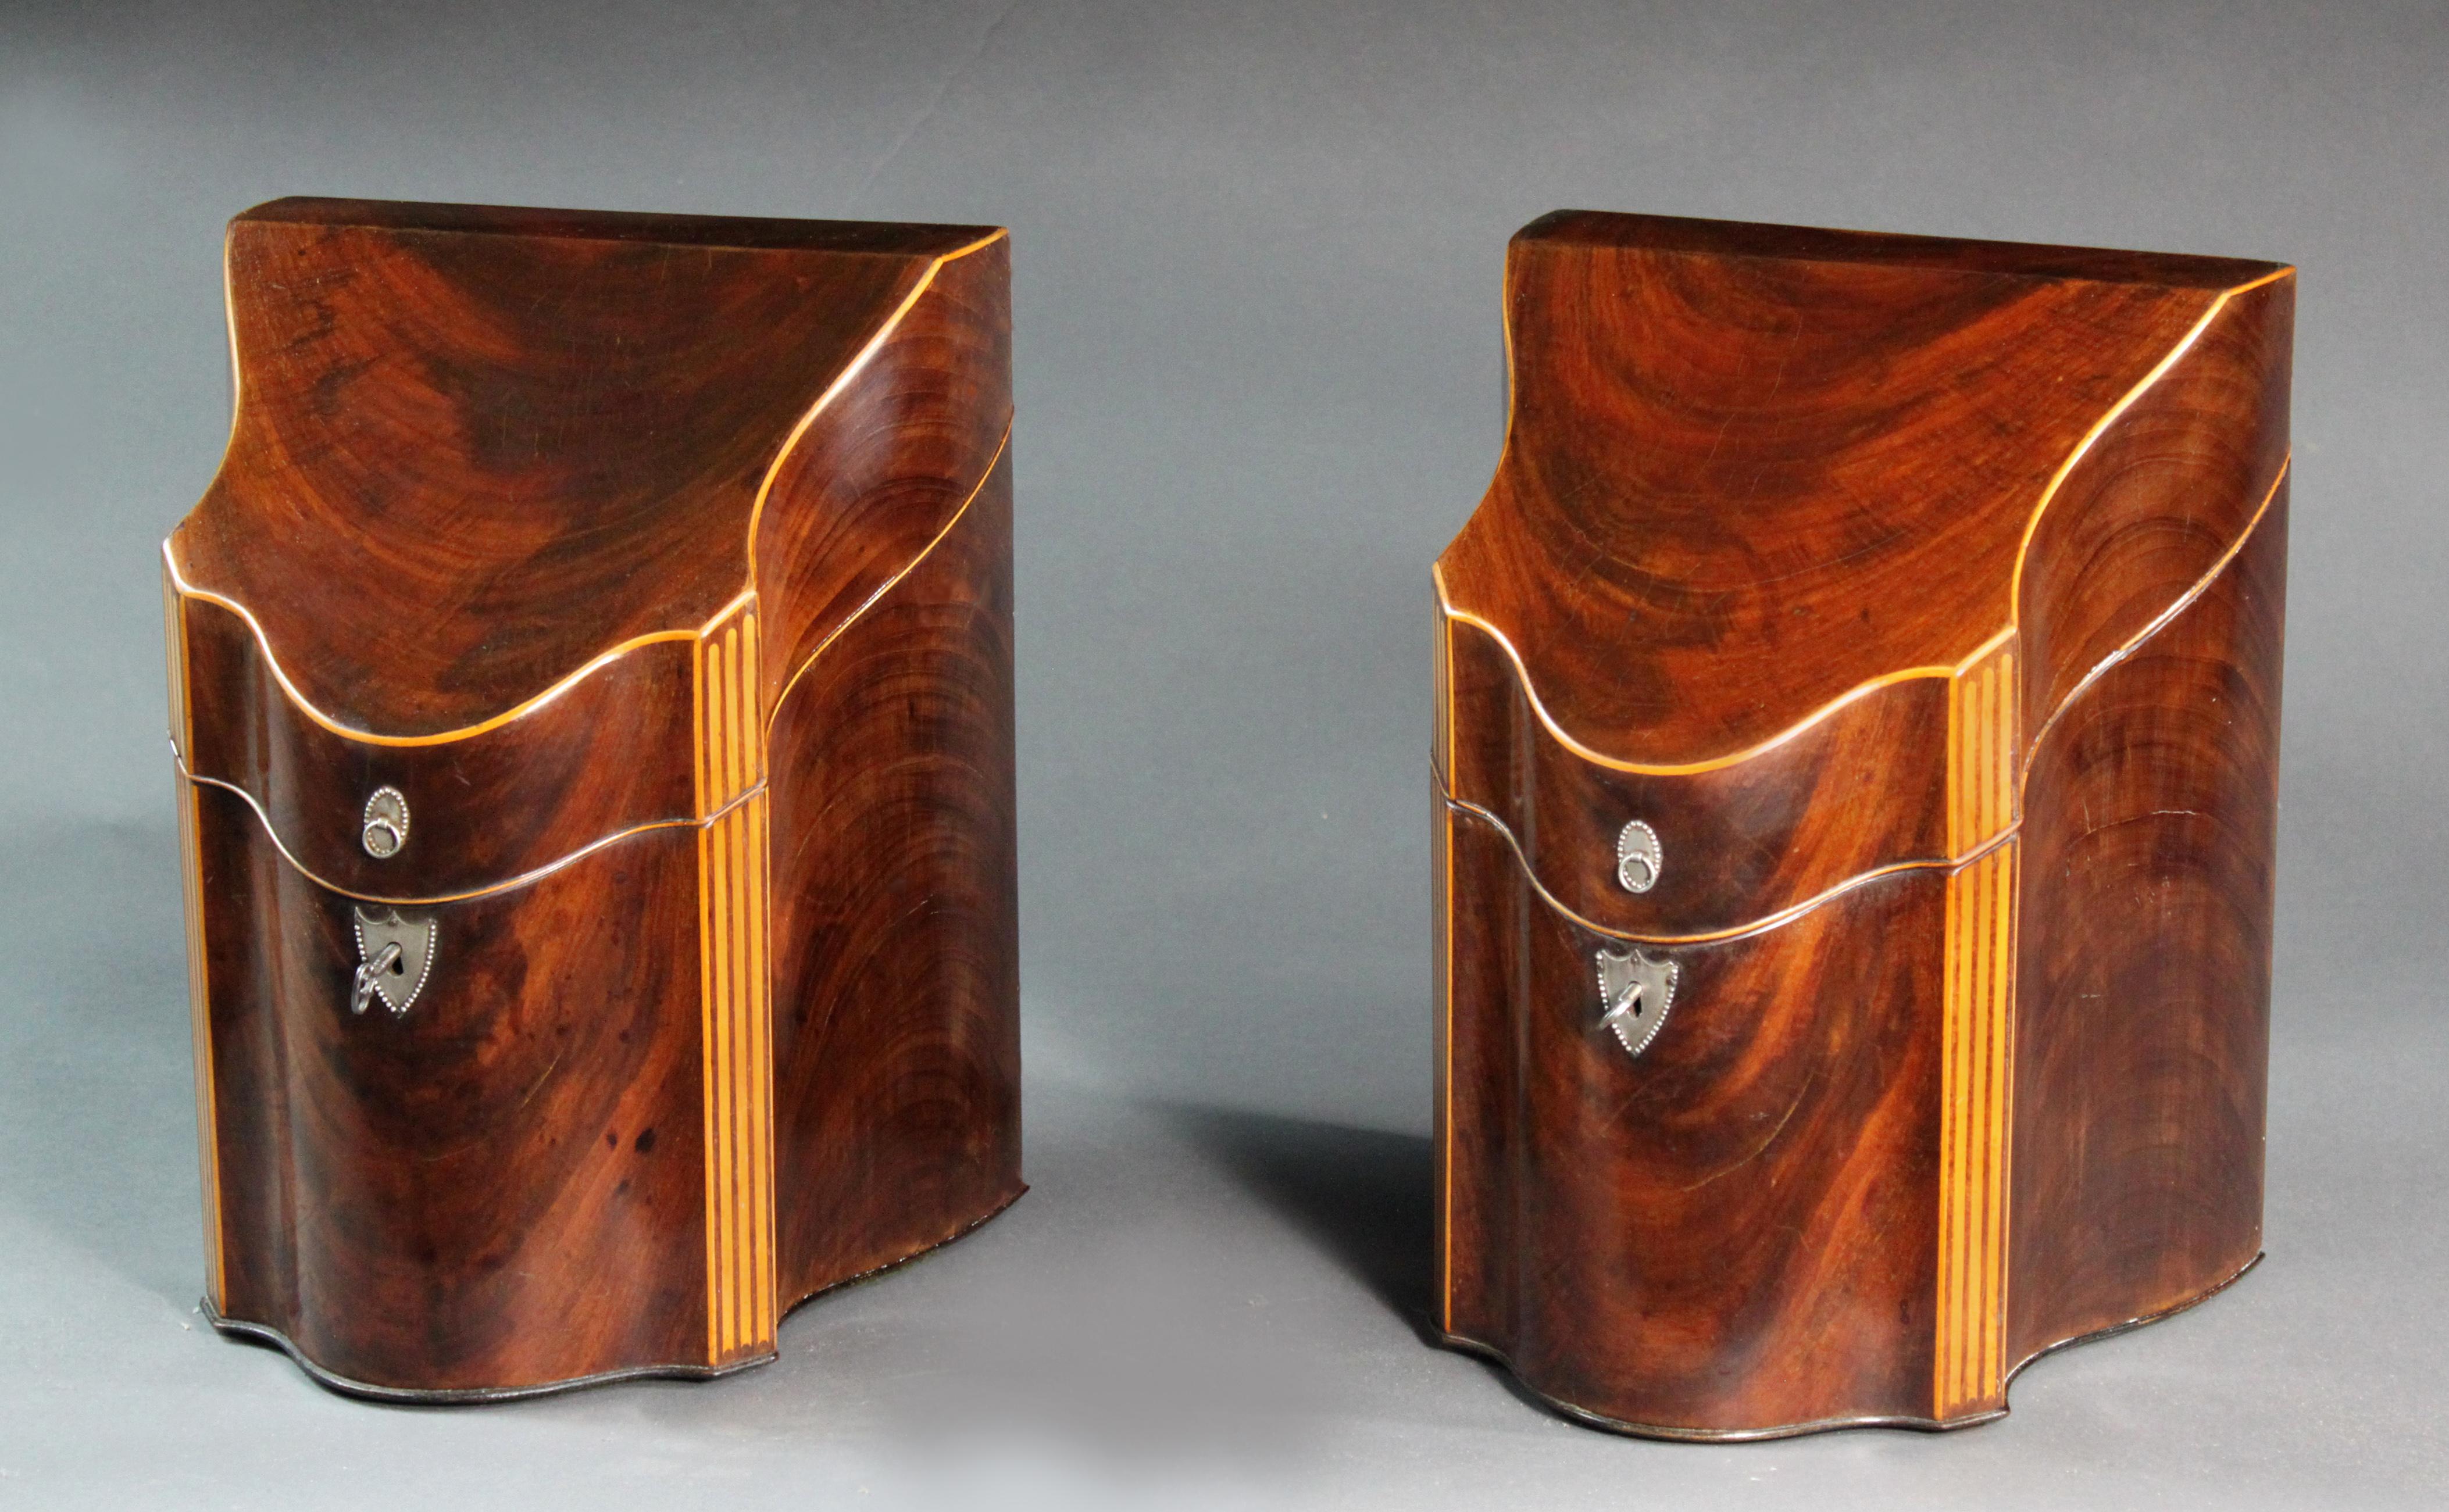 Fine pair of George III Sheraton Period figured mahogany knife boxes with striking boxwood stringing, silver plated mounts and the original fitted interiors. We have never seen serpentine sides on a knife box before and together with the serpentine